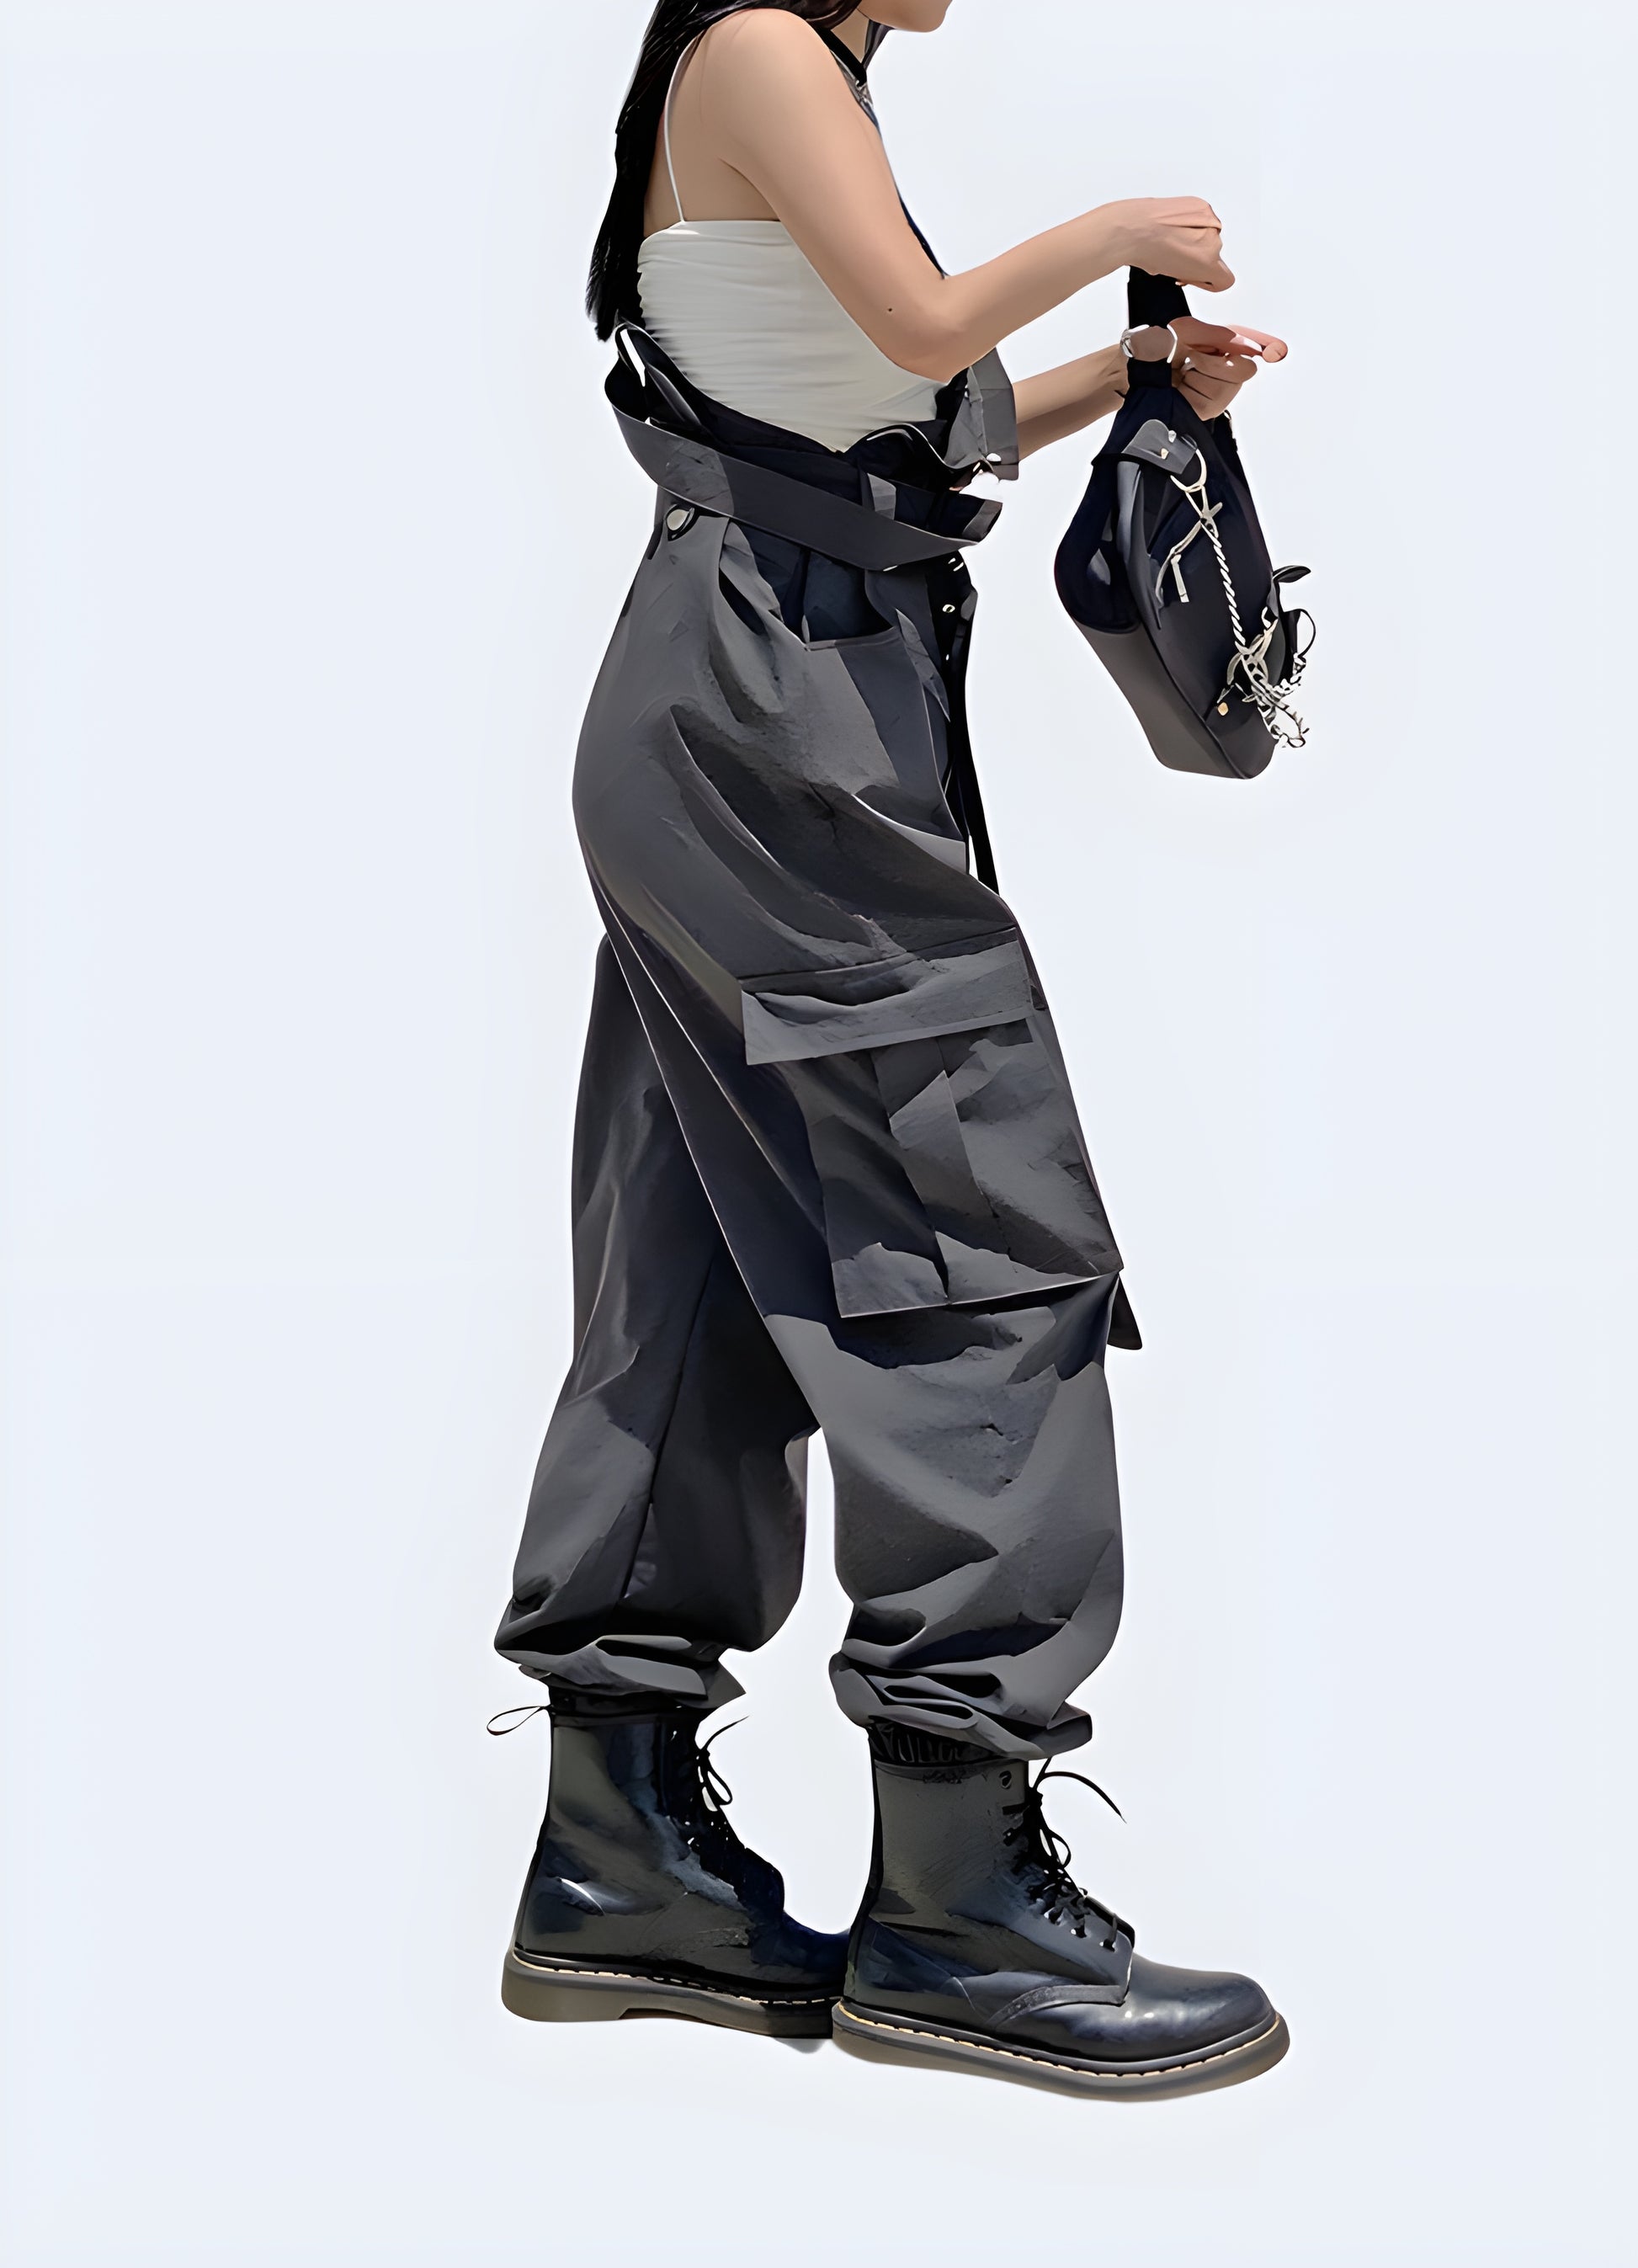 Tapered at the ankle, the black baggy pants create a retro-vintage silhouette that captivates and intrigues.